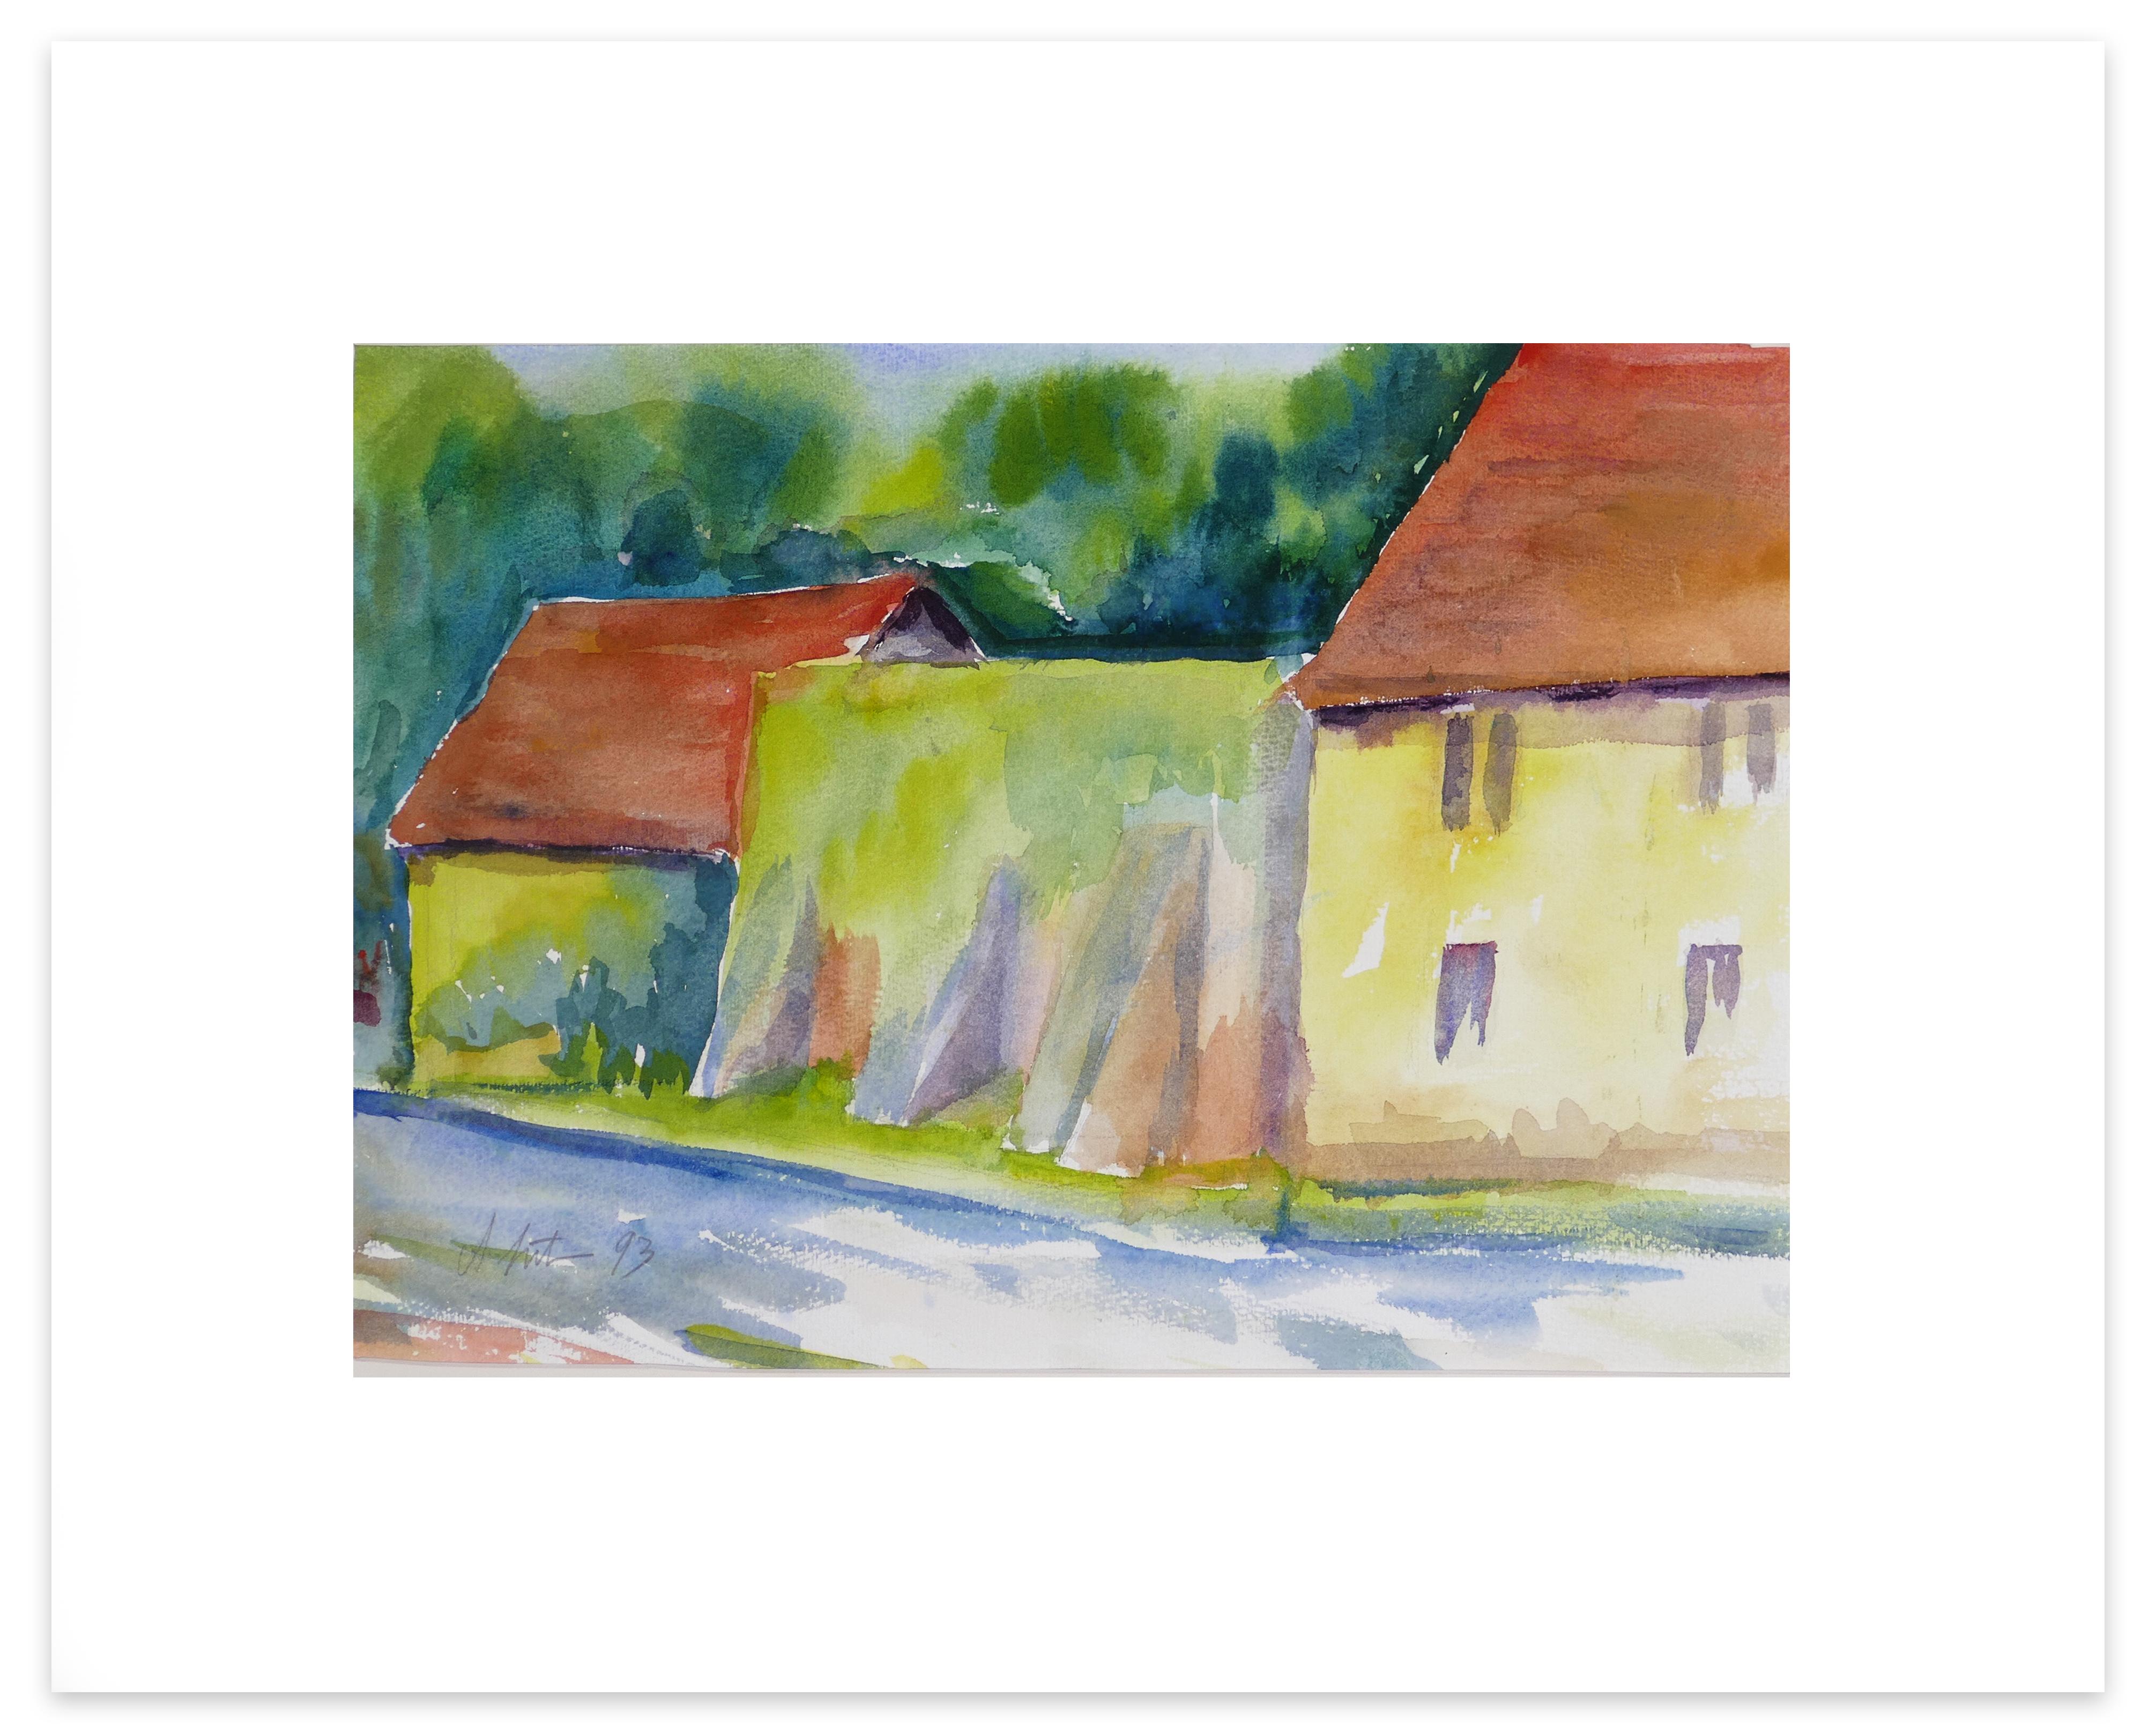 Countryside - Original Watercolor by Armin Guther - 1993